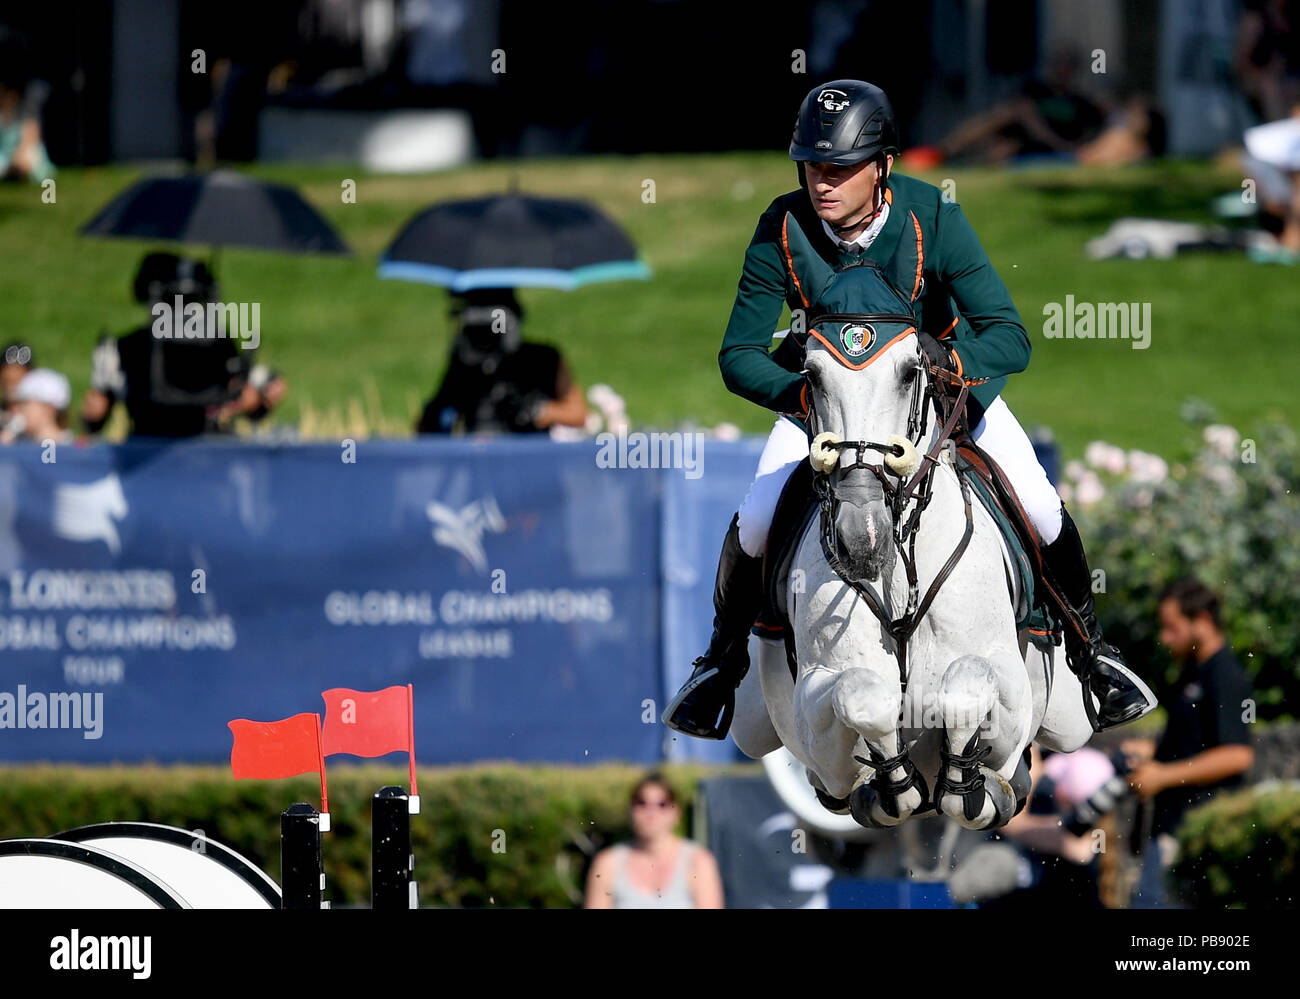 Berlin, Germany. 29th July, 2018. Equestrian sports/jumping, Global Champions Tour: Denis Lynch from Ireland, on RMF Bella Baloubet jump over an obstacle. Credit: Britta Pedersen/dpa-Zentralbild/dpa/Alamy Live News Stock Photo